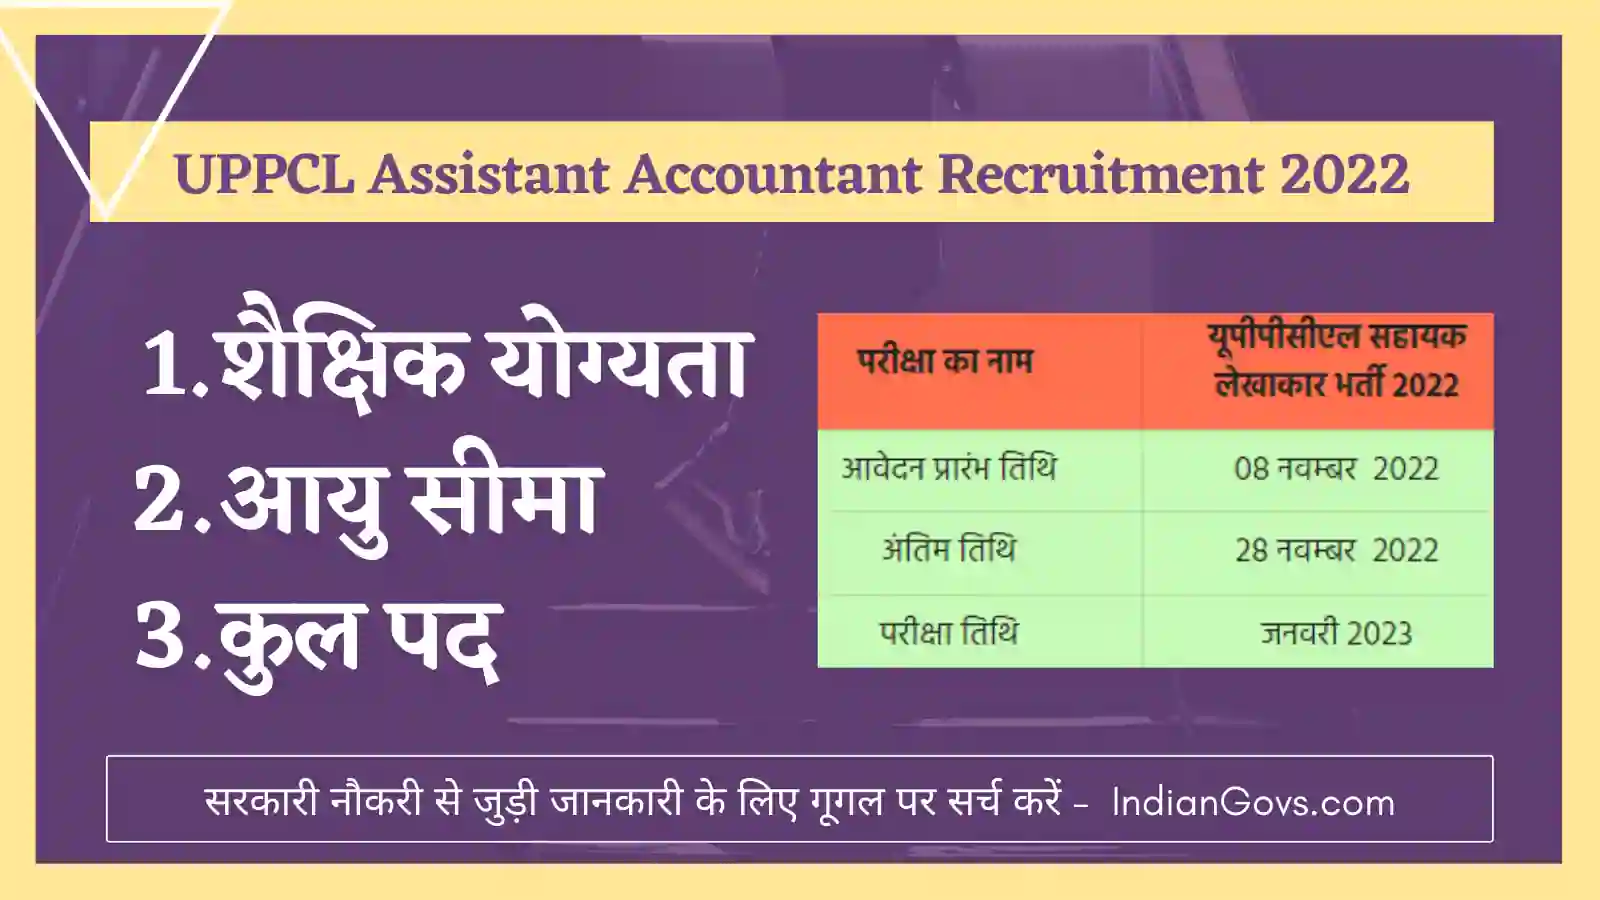 UPPCL Assistant Accountant Recruitment 2022 In Hindi